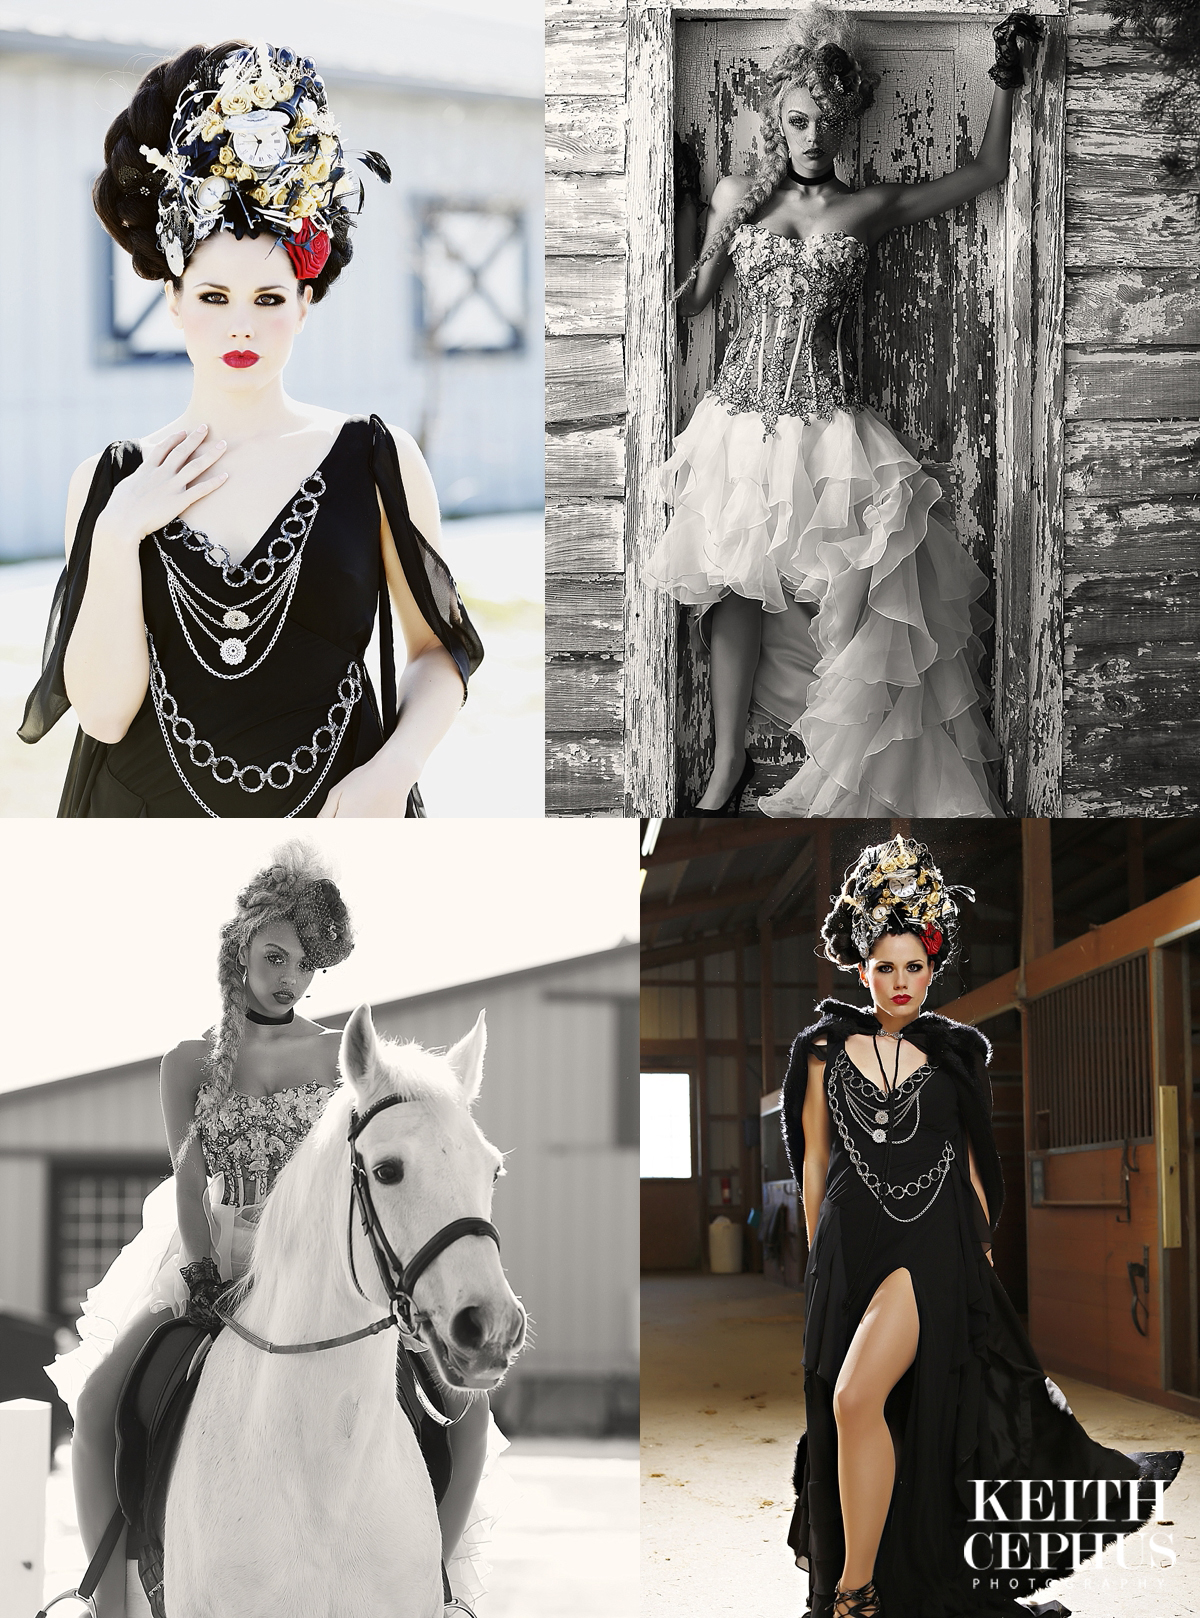 Virginia Beach Fashion Photographer | Sneak Preview:  Fashion Shoot With Some Amazing Artists!